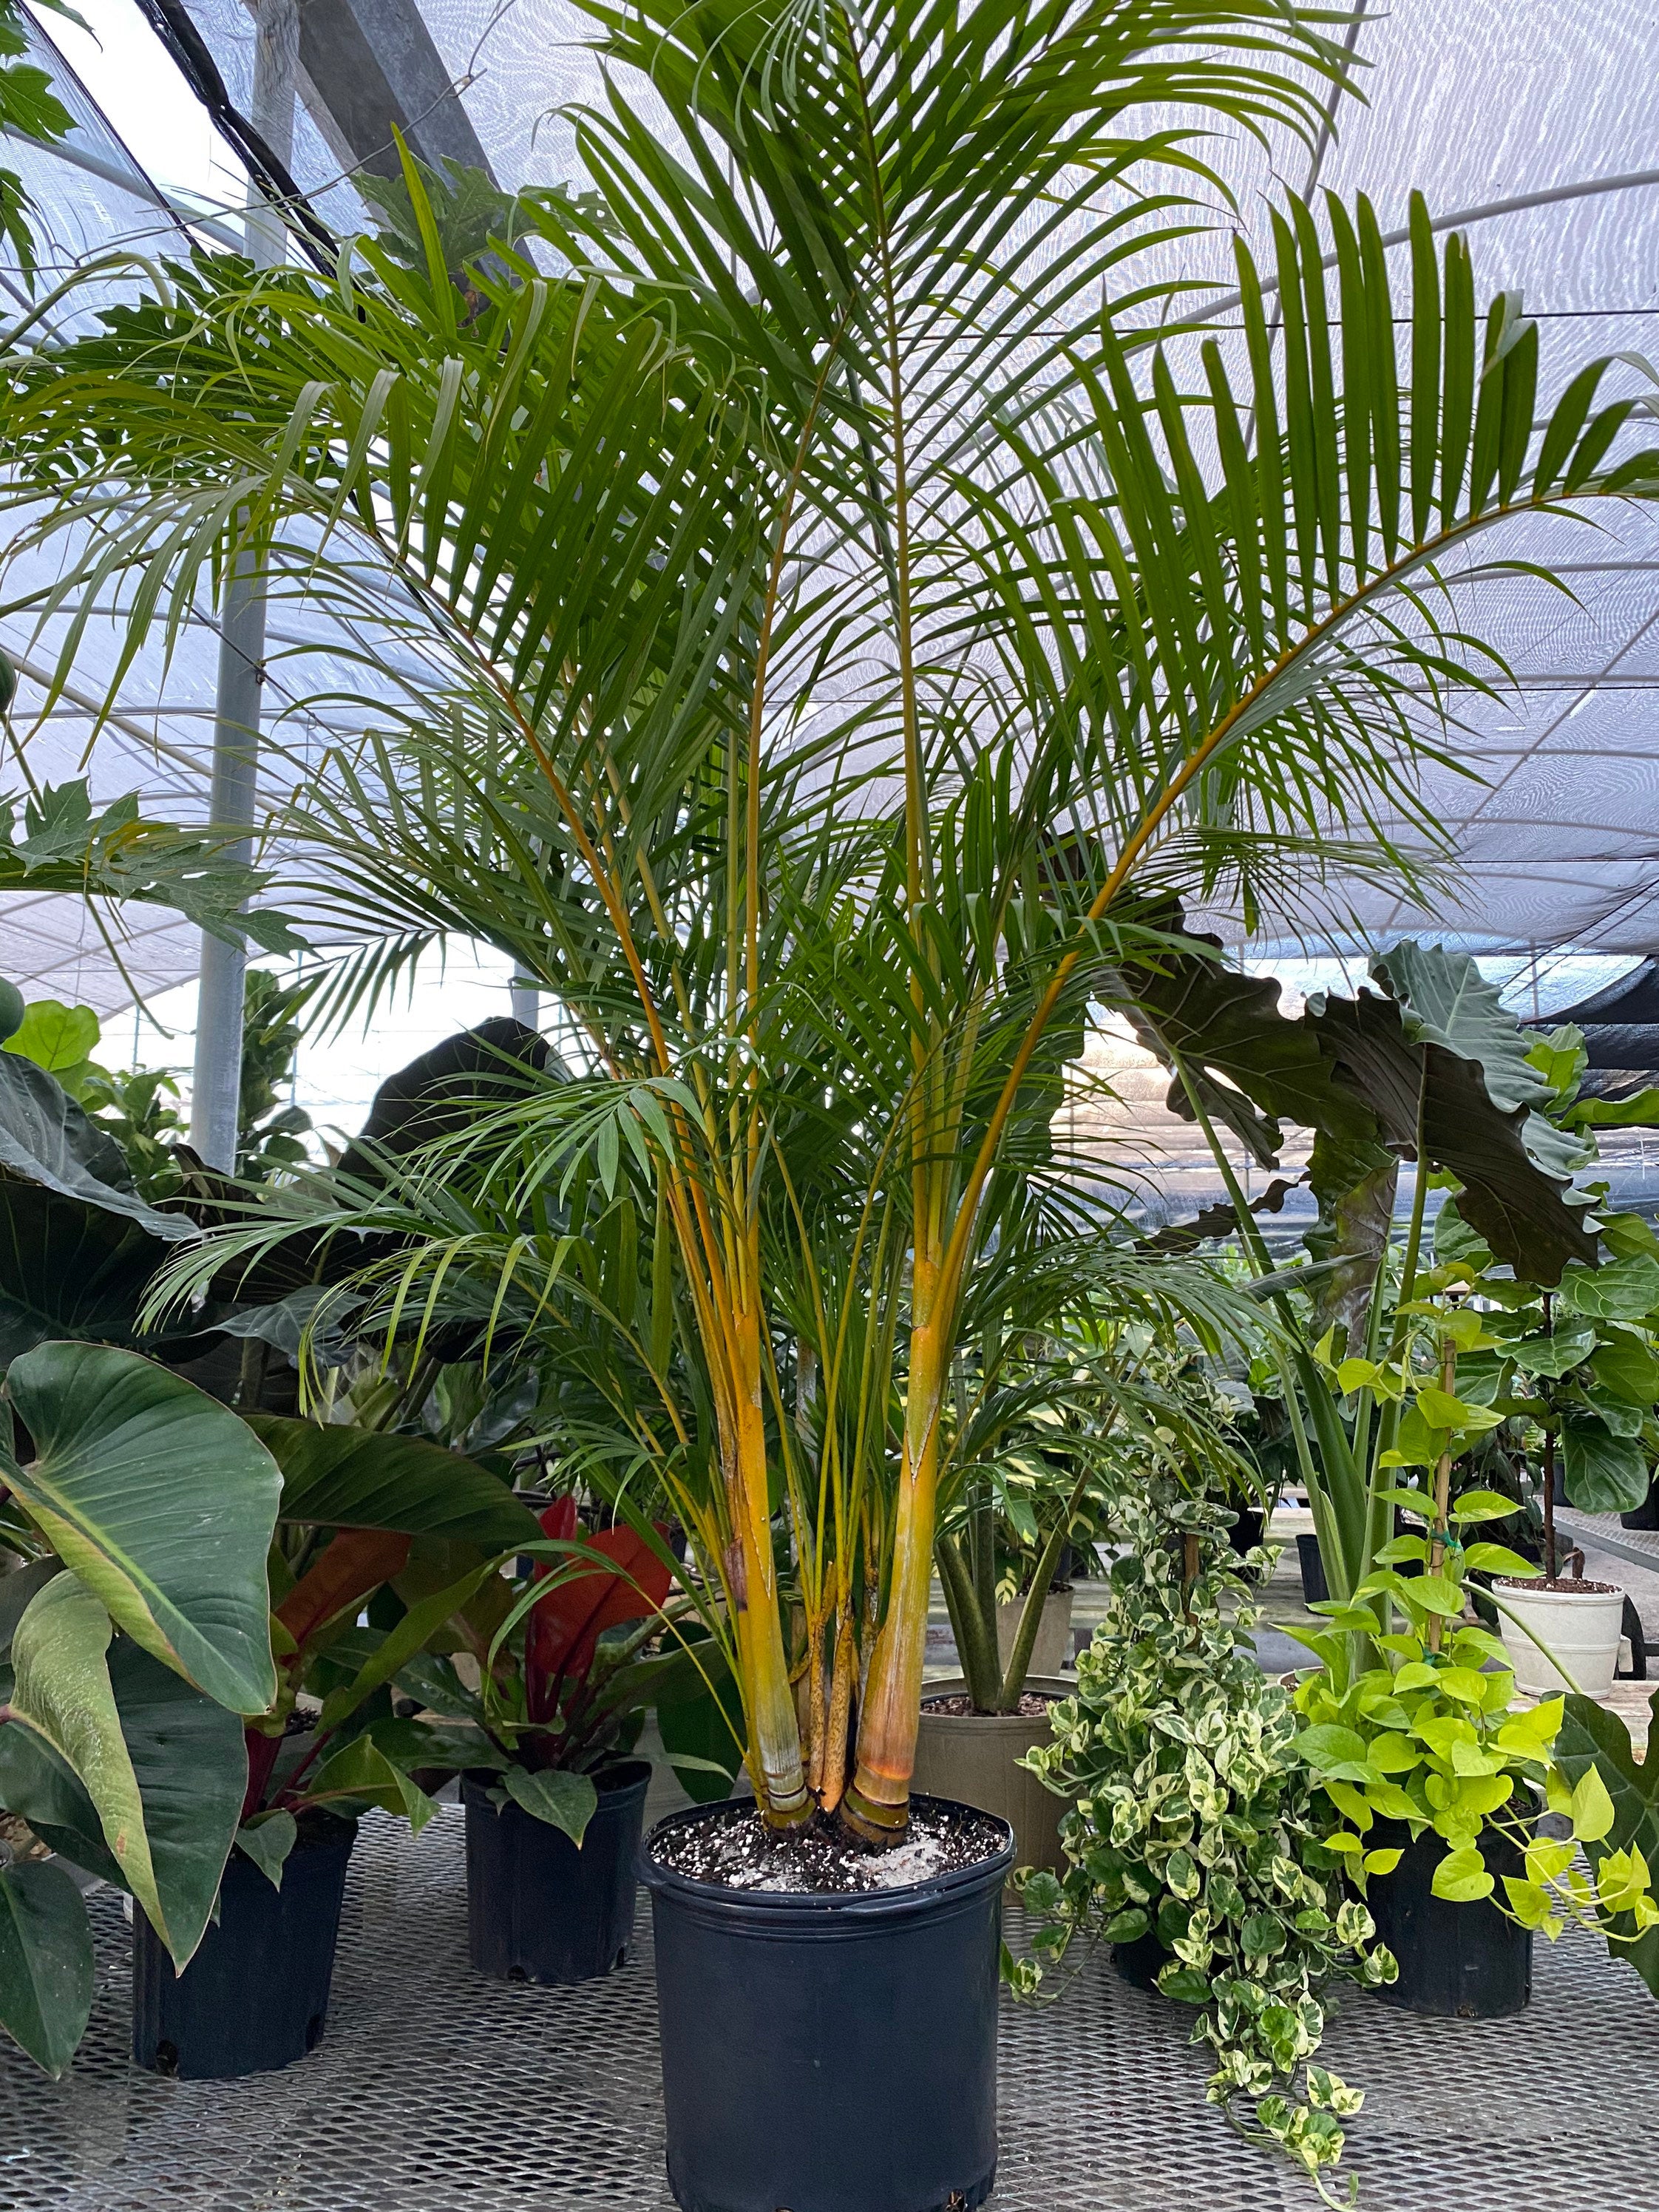 Areca Palm, Golden Cane, Dypsis Lutescens in a pot